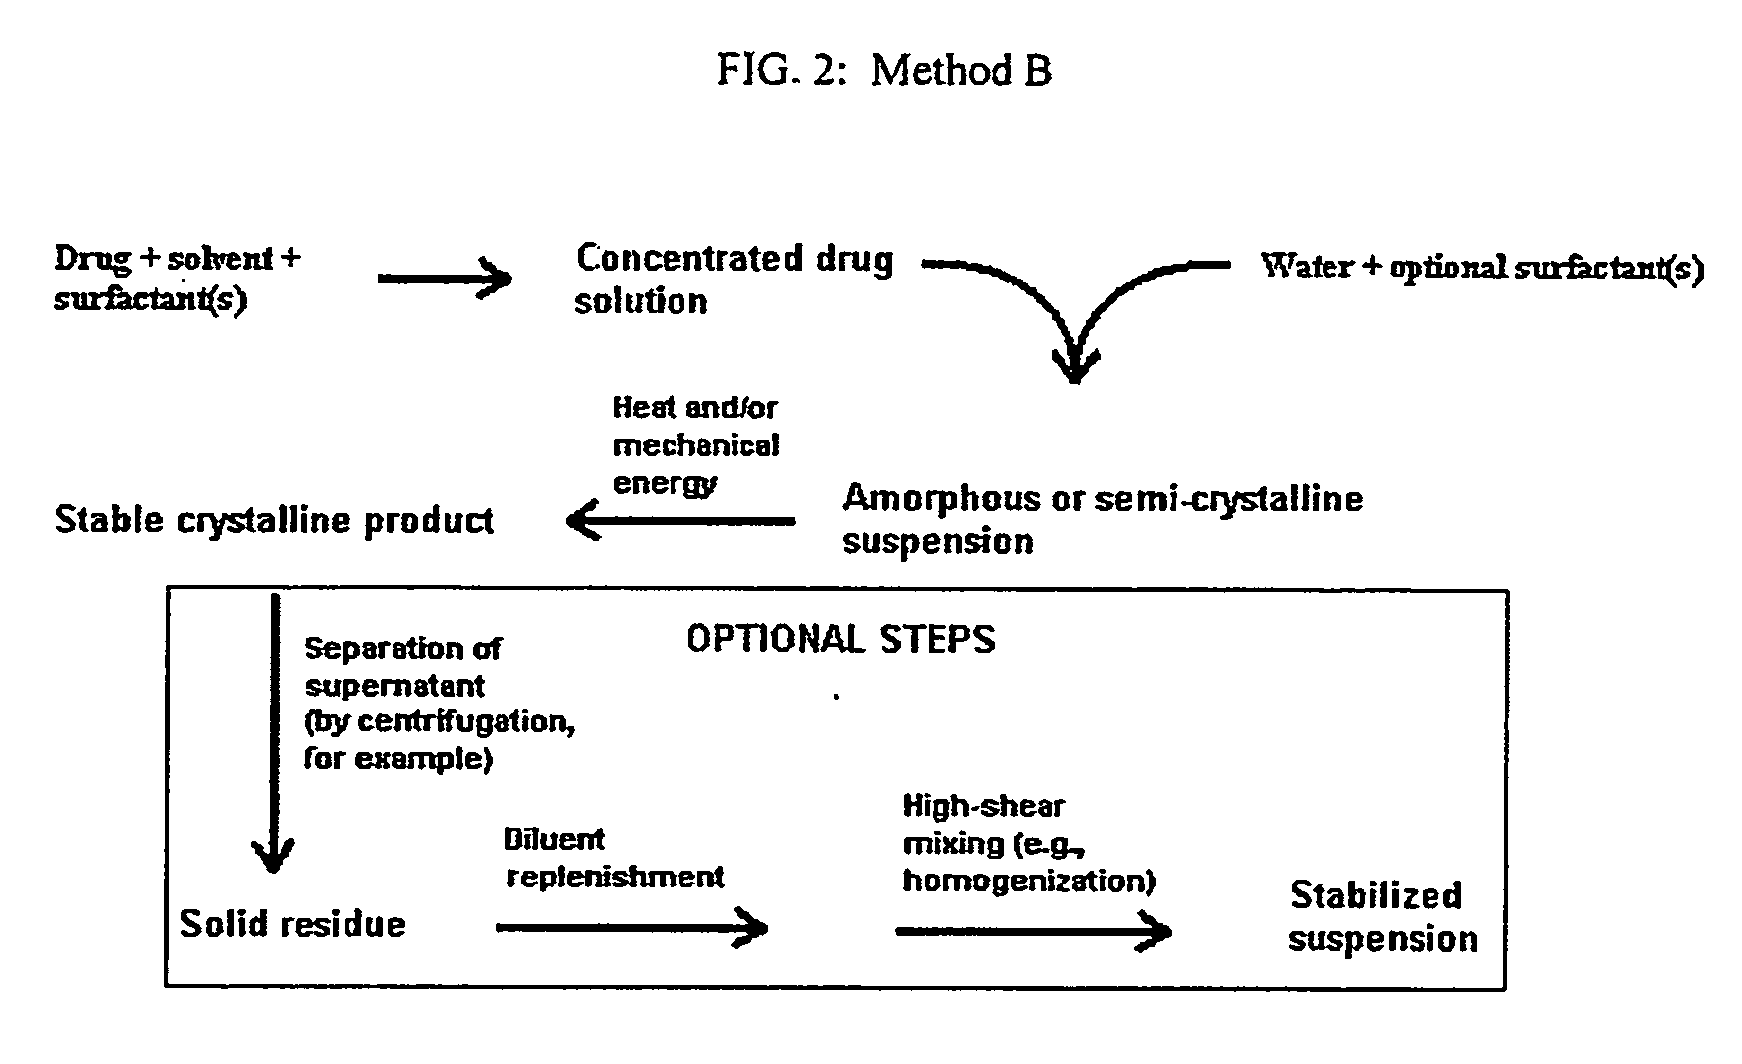 Surfactant systems for delivery of organic compounds